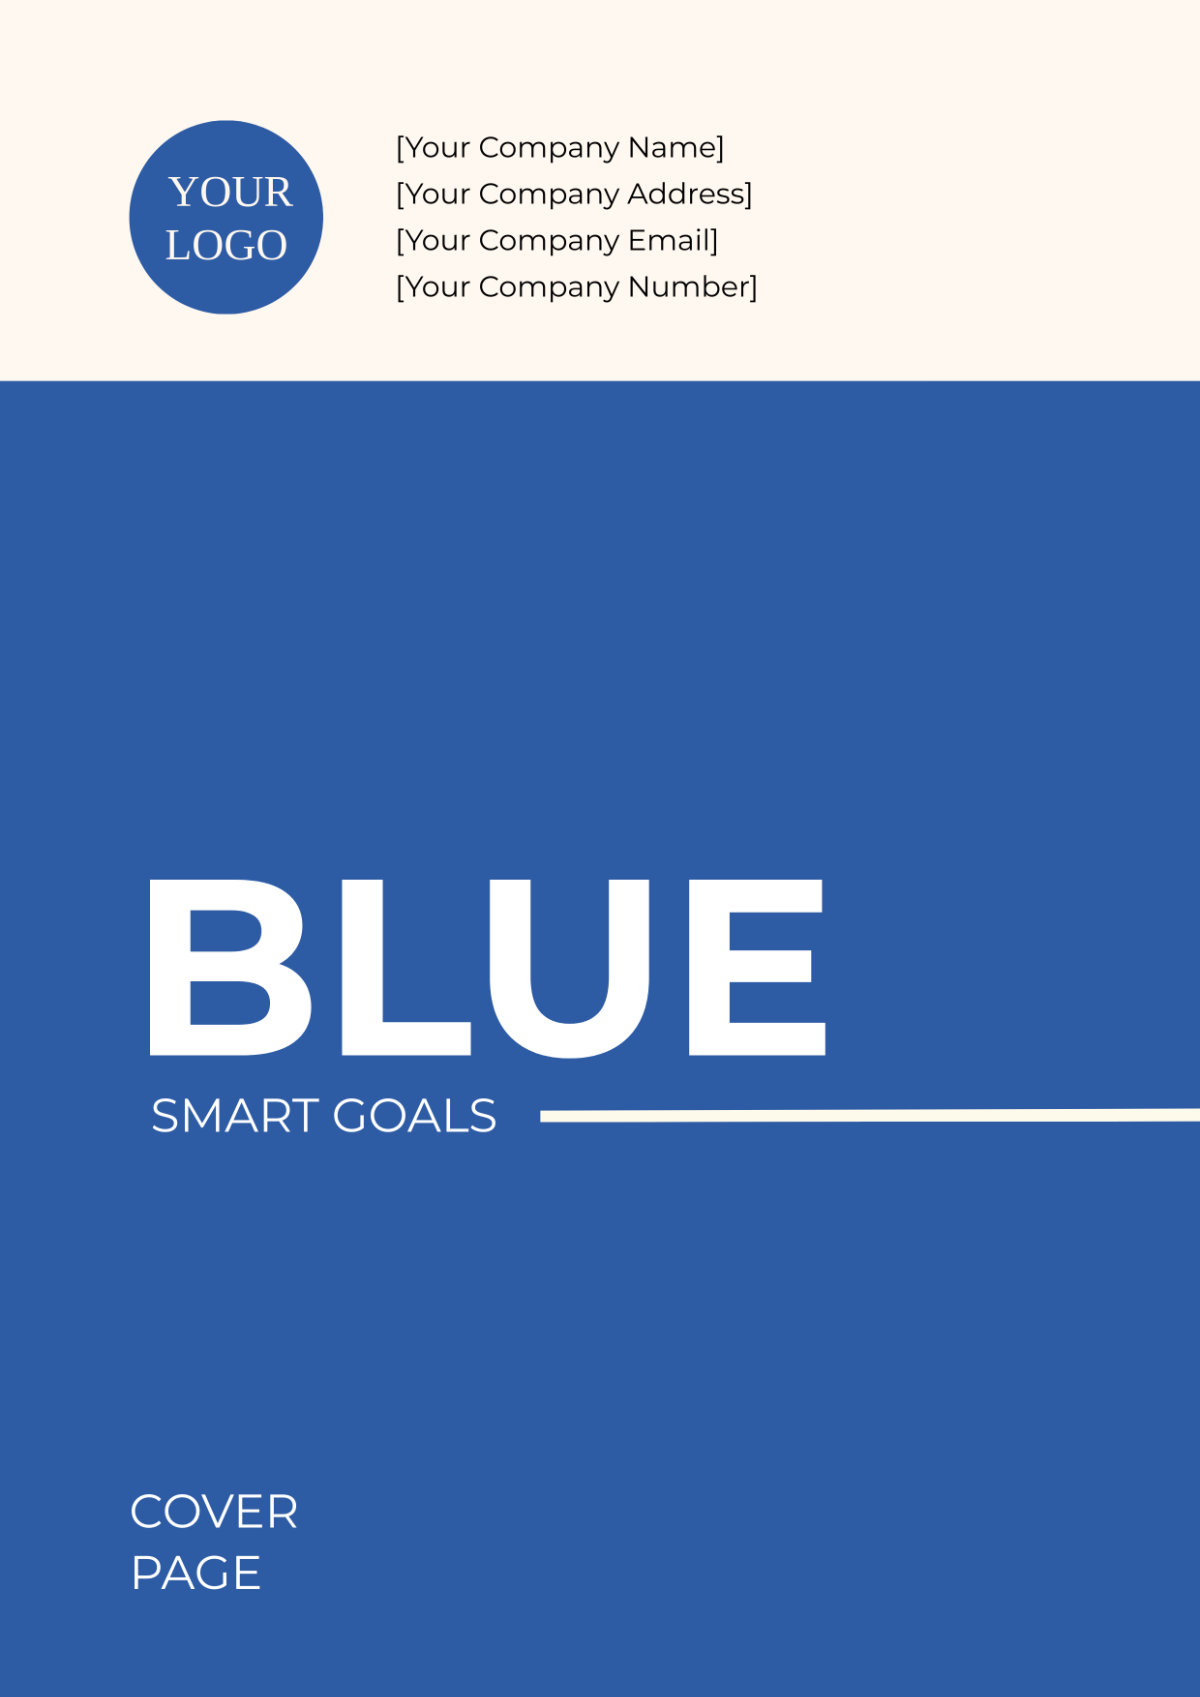 Blue SMART Goals Cover Page